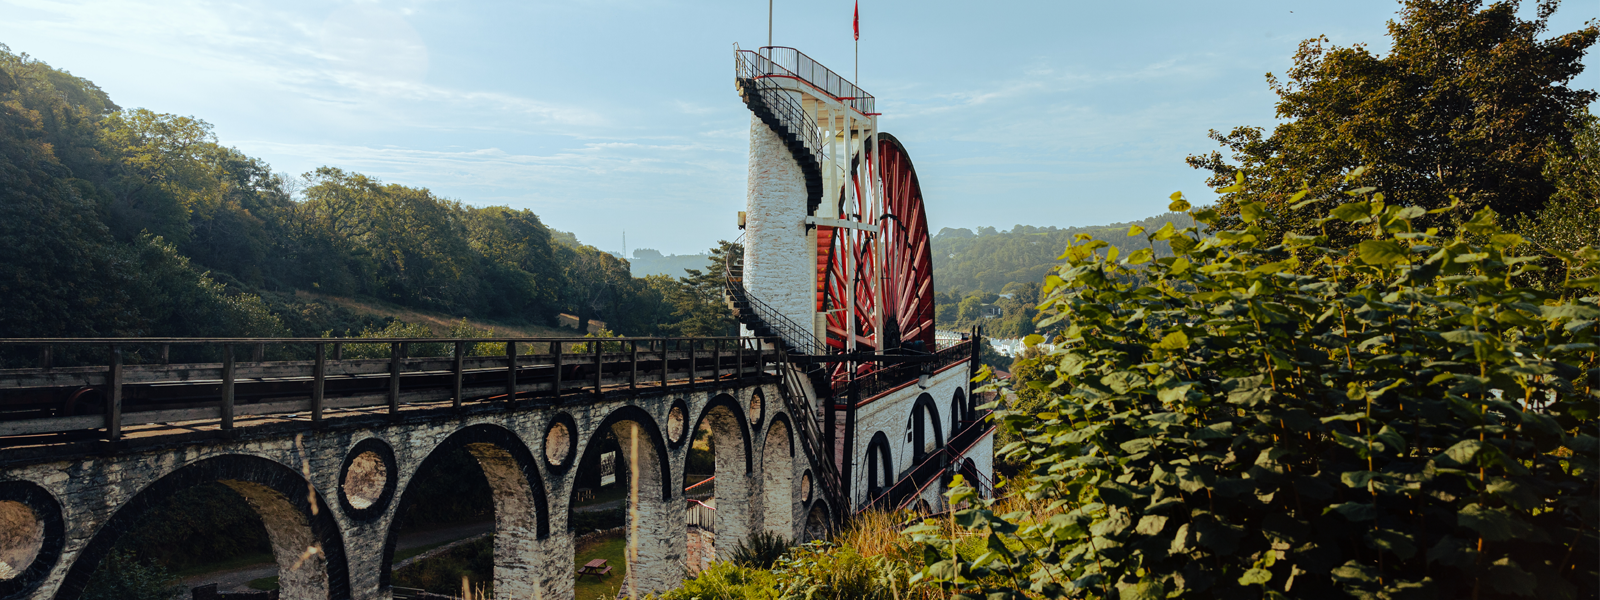 The Great Laxey Wheel on the Isle of Man. The world's largest surviving waterwheel of its kind. An arched aqueduct leads towards spiral steps next to the giant red water wheel, situated in a green valley.